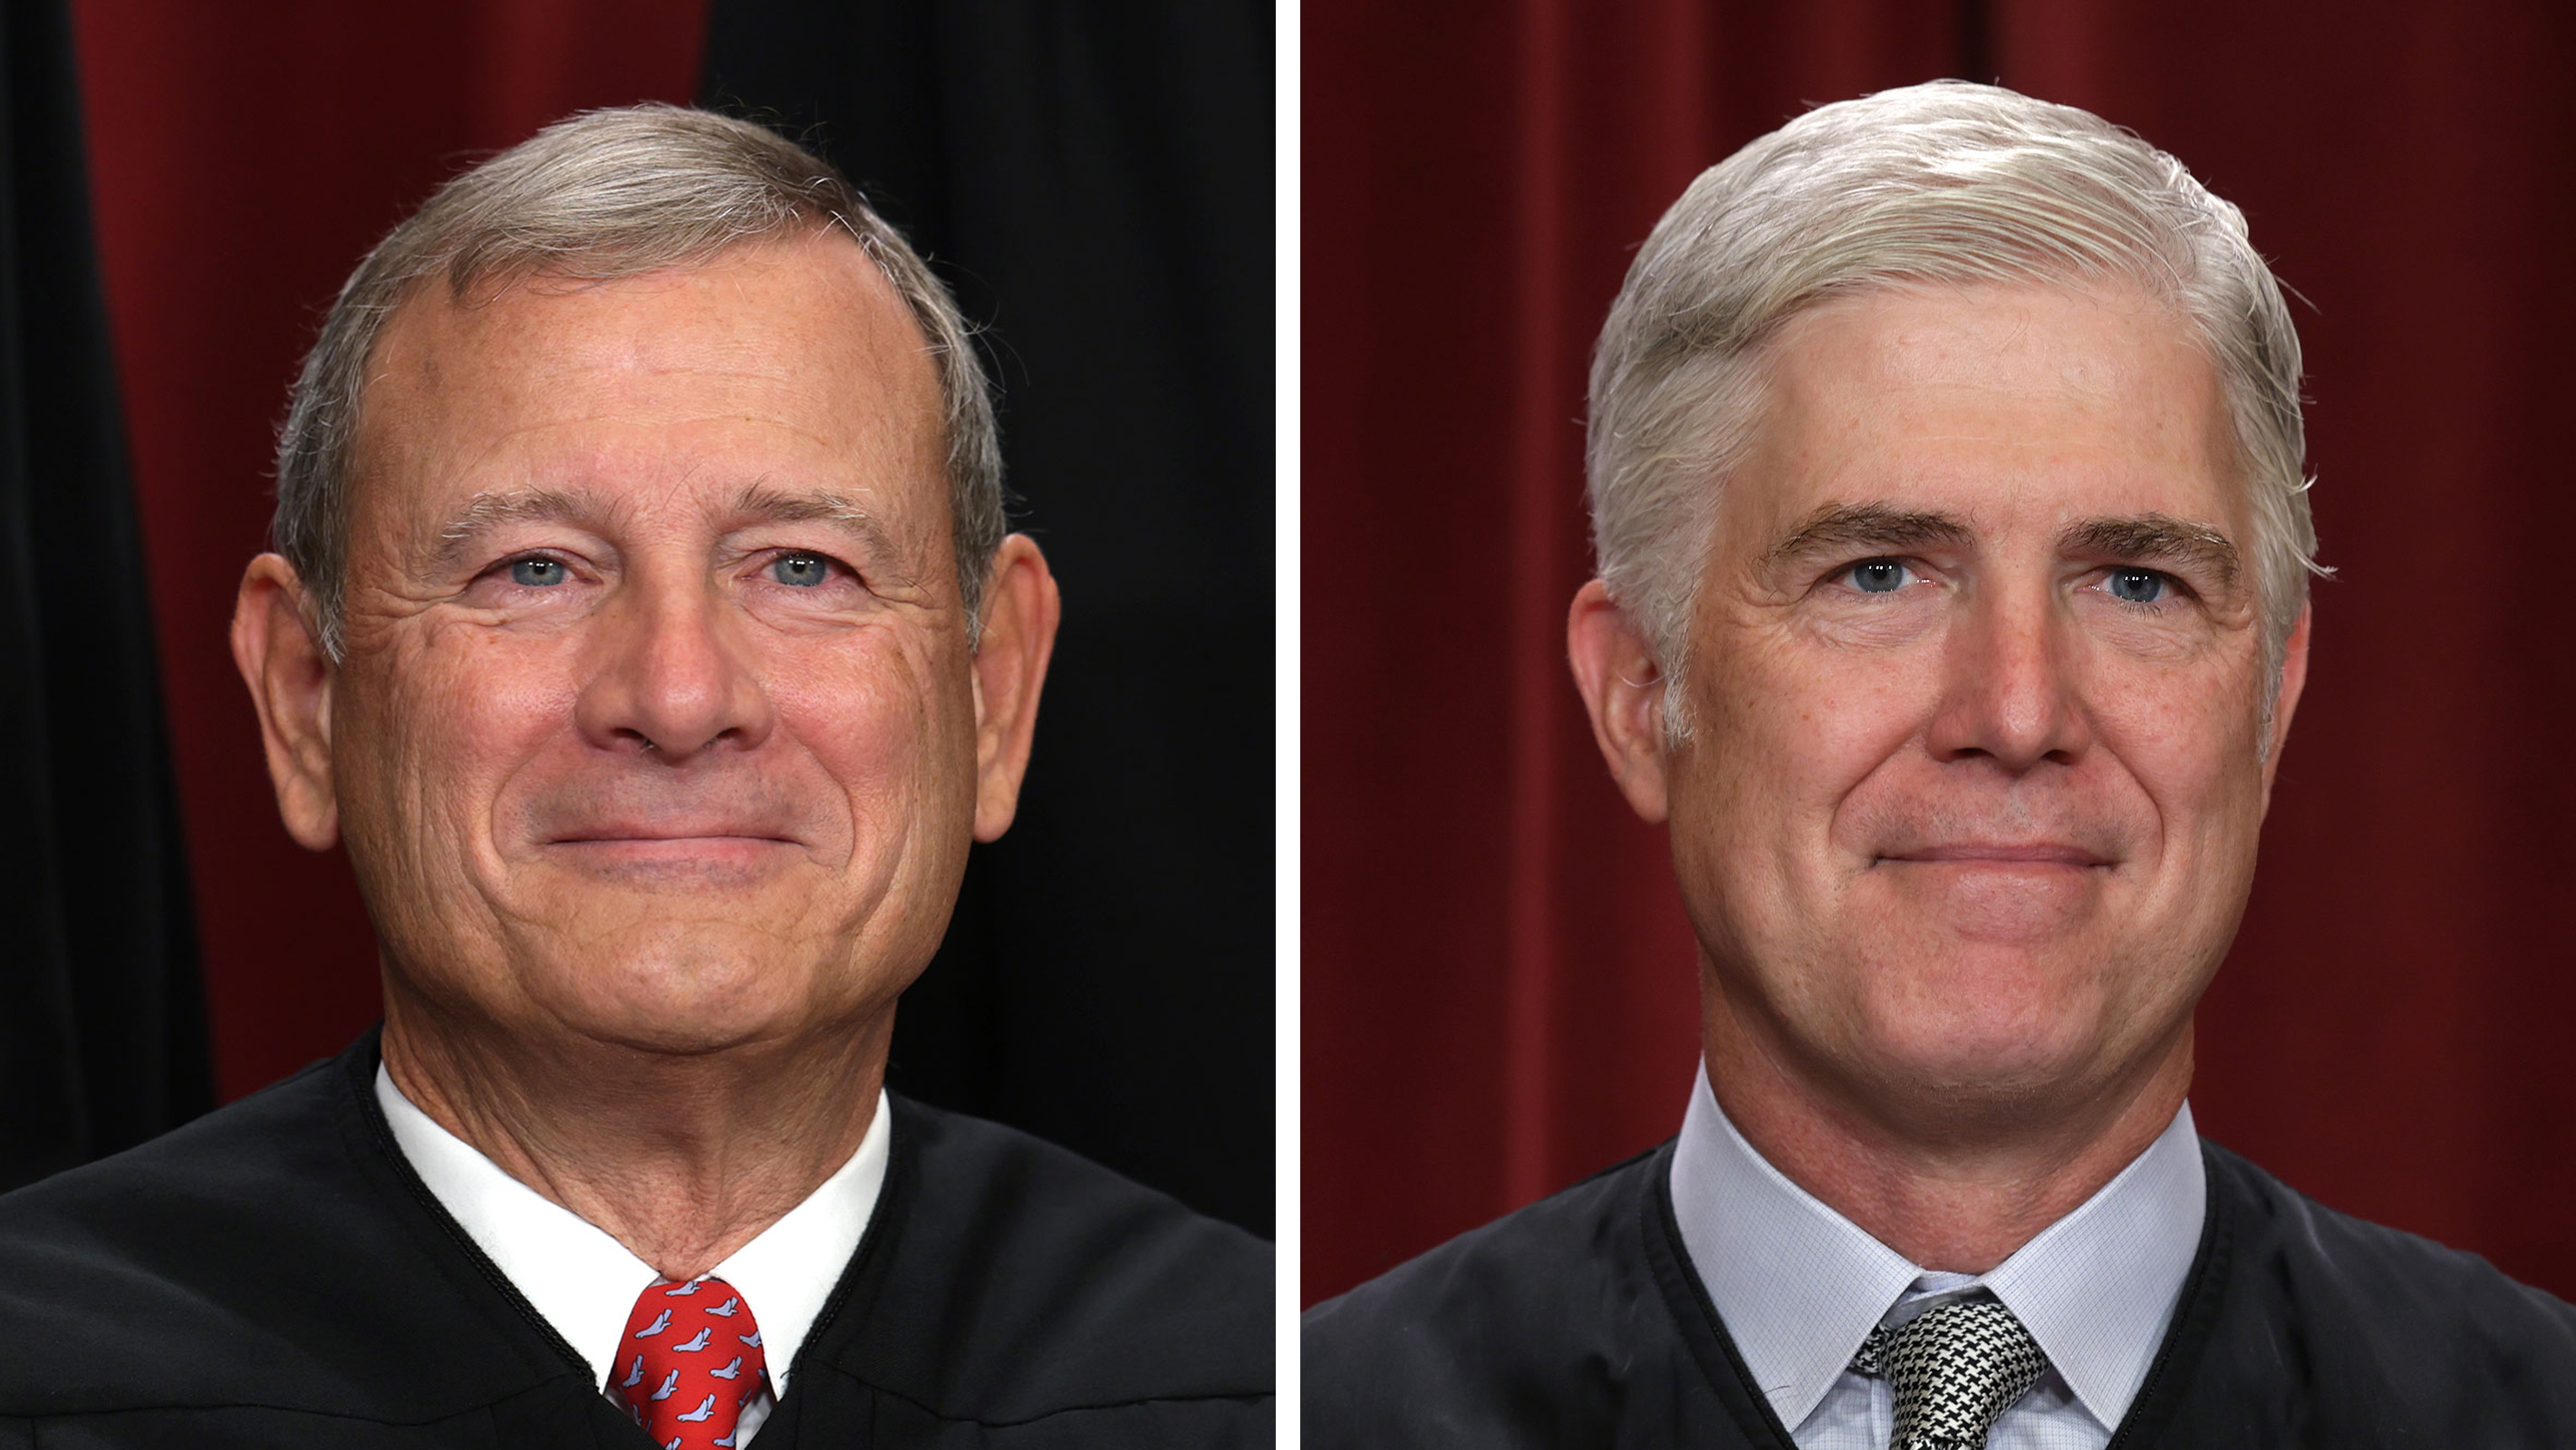 Chief Justice John Roberts and Justice Neil Gorsuch.